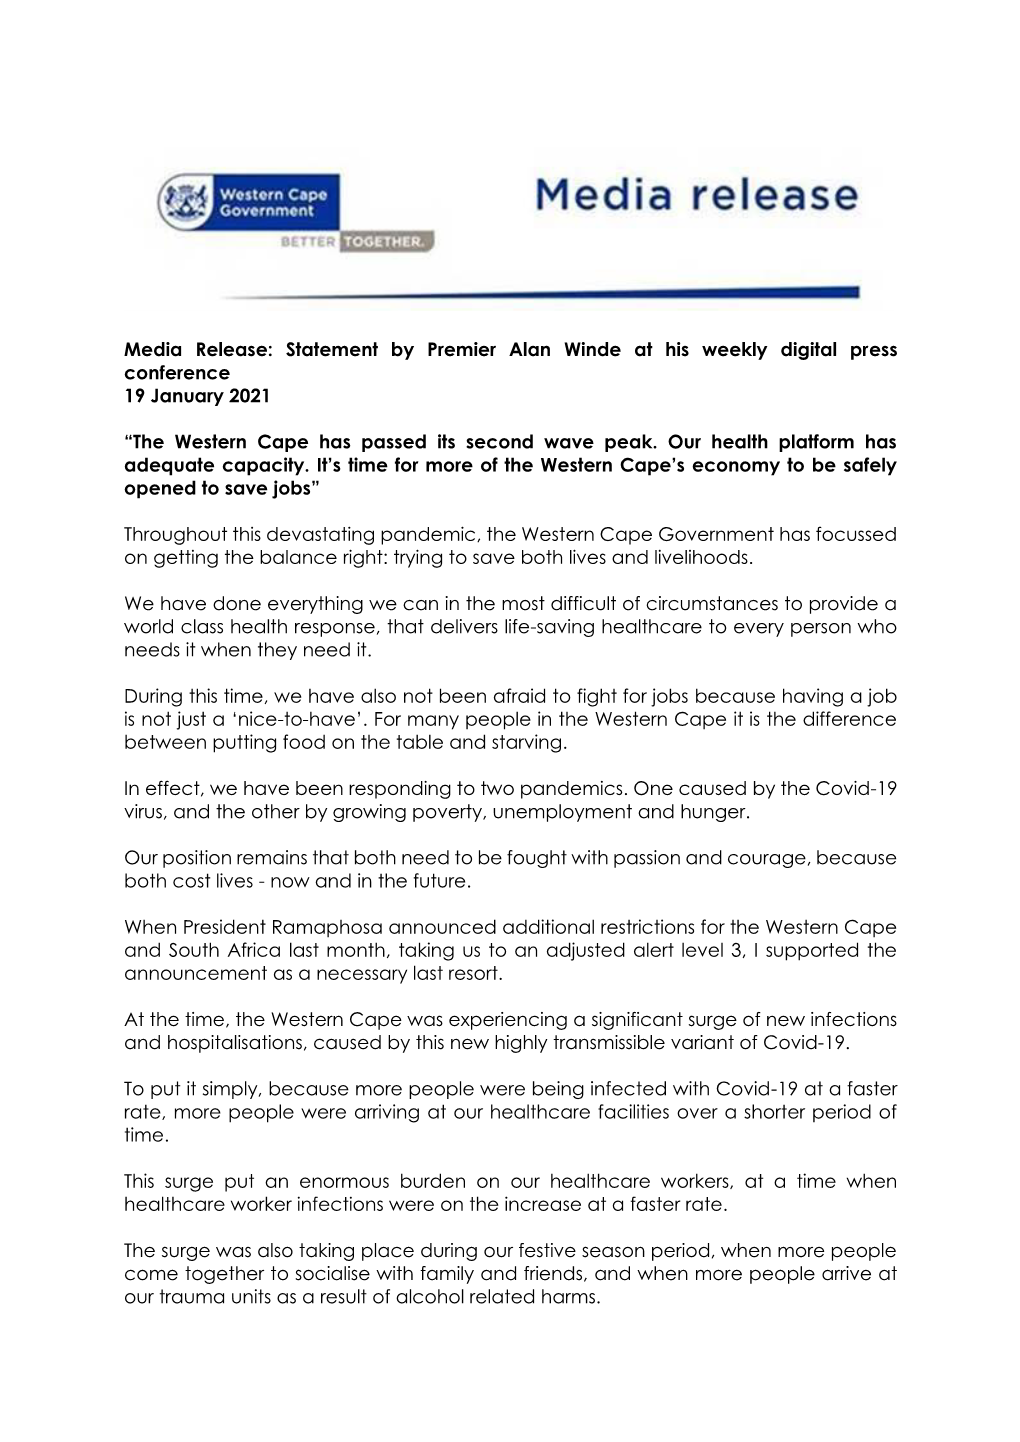 Media Release: Statement by Premier Alan Winde at His Weekly Digital Press Conference 19 January 2021 “The Western Cape Has Pa